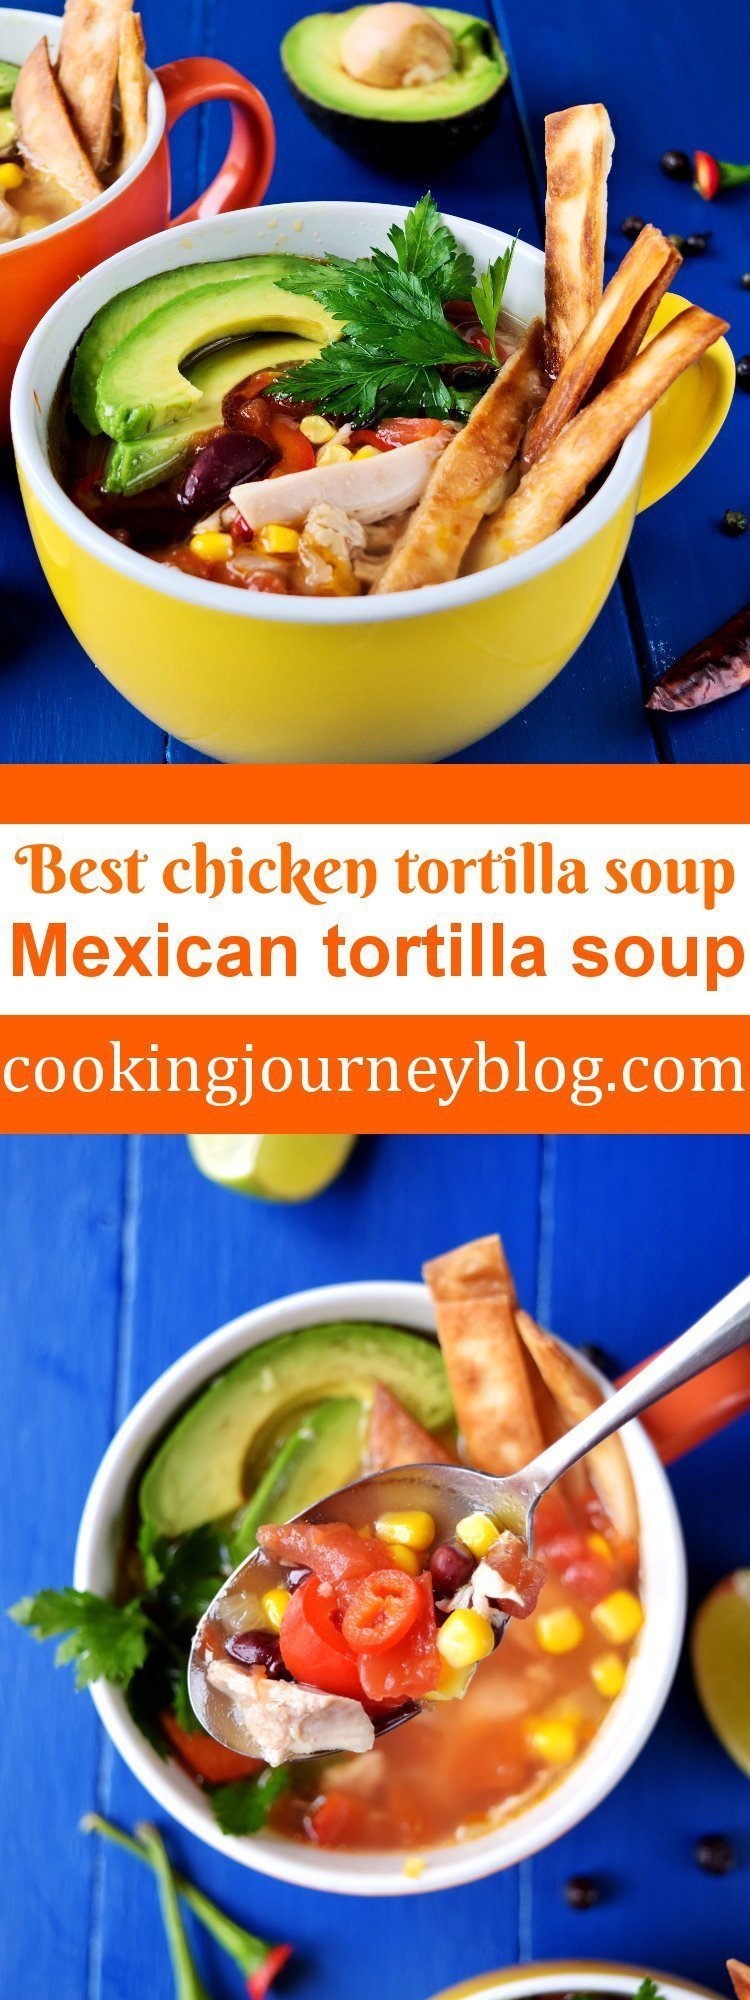 Mexican tortilla soup is easy, spicy and colorful comfy food you need to make this season! This delicious and really hot Mexican chicken soup with crunchy tortilla and creamy avocado on top will warm you and fill you up.